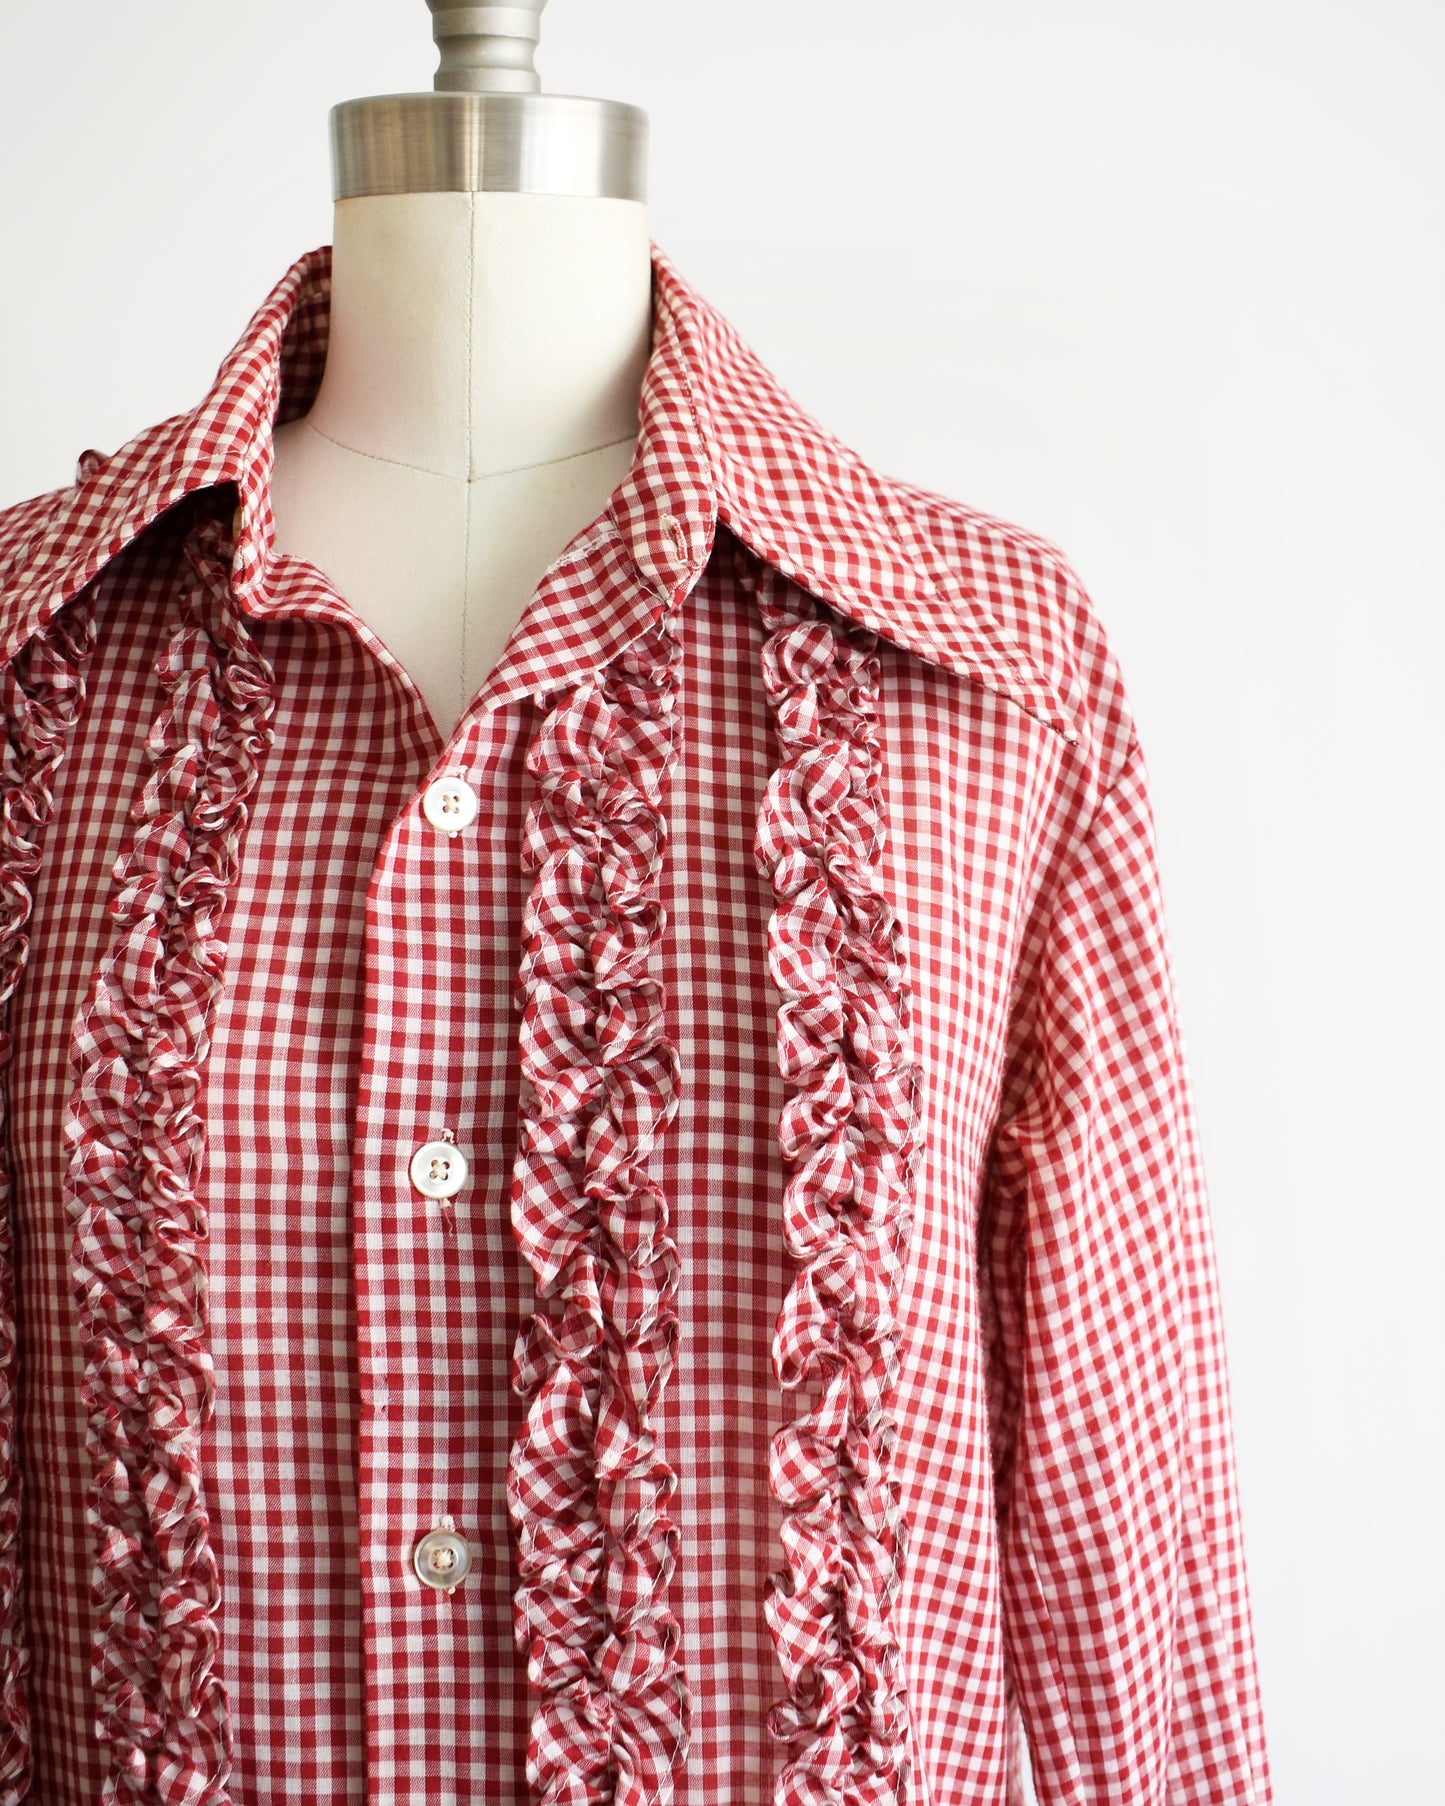 Close up of the red and white check, ruffles on the front, and plastic buttons.